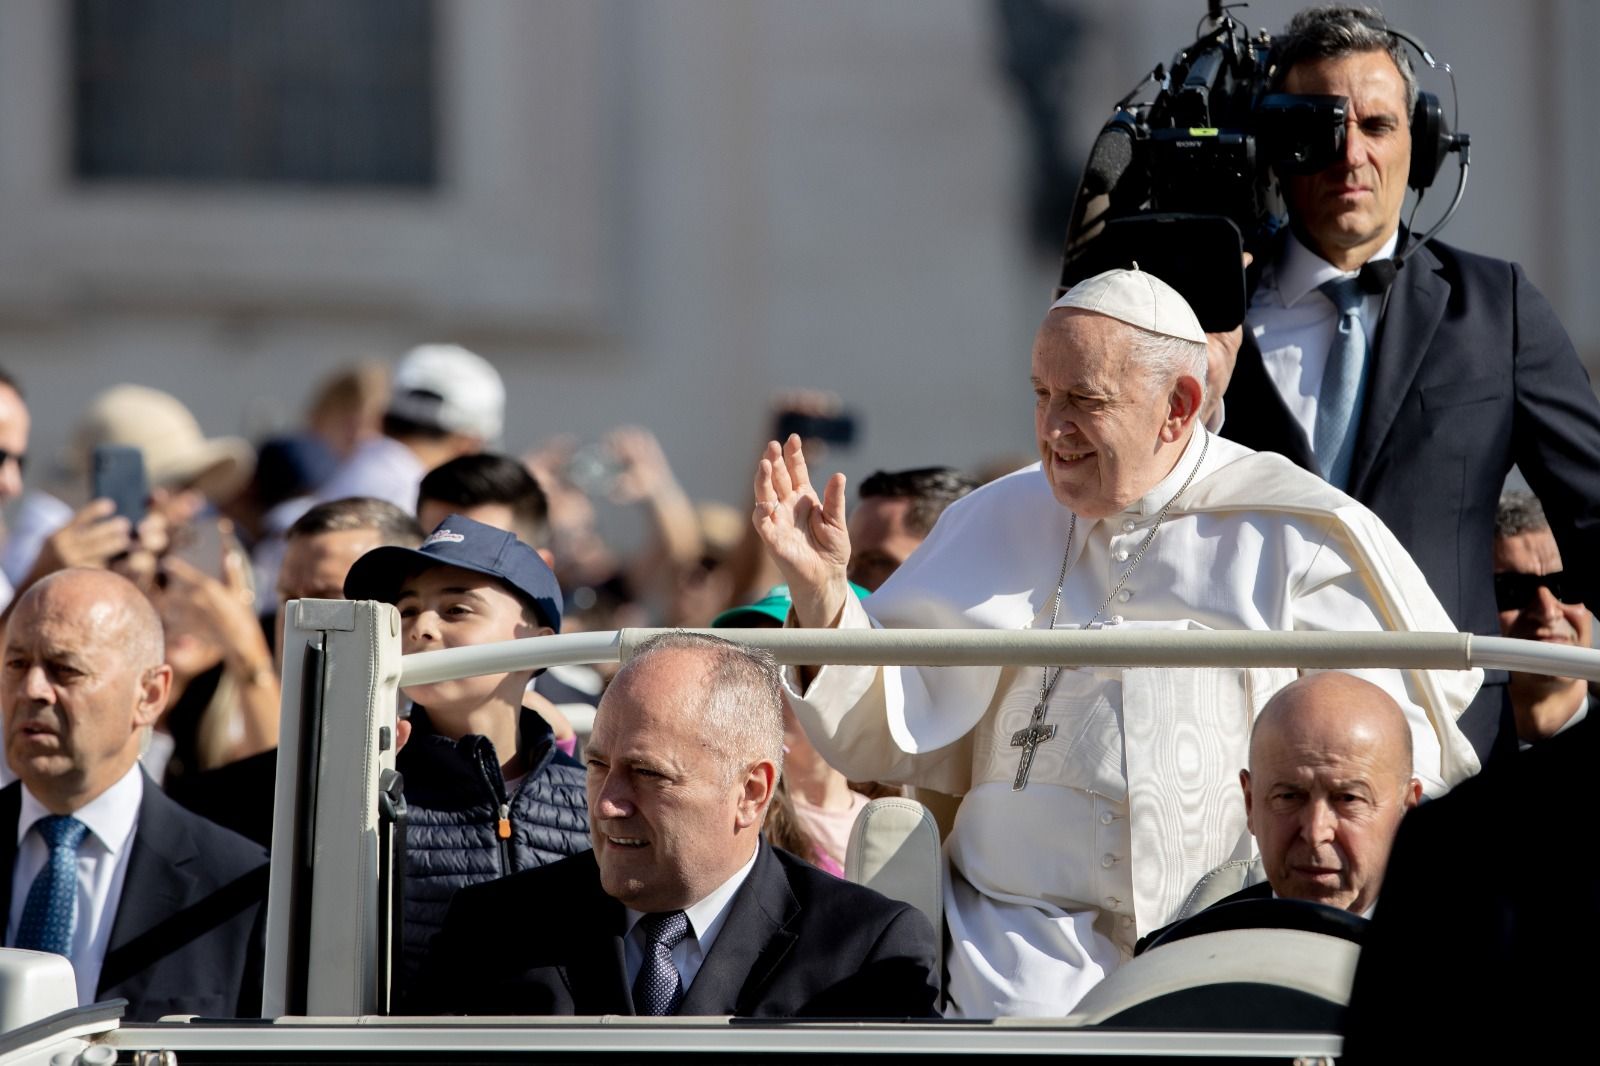 Pope Francis hospitalized for abdominal surgery